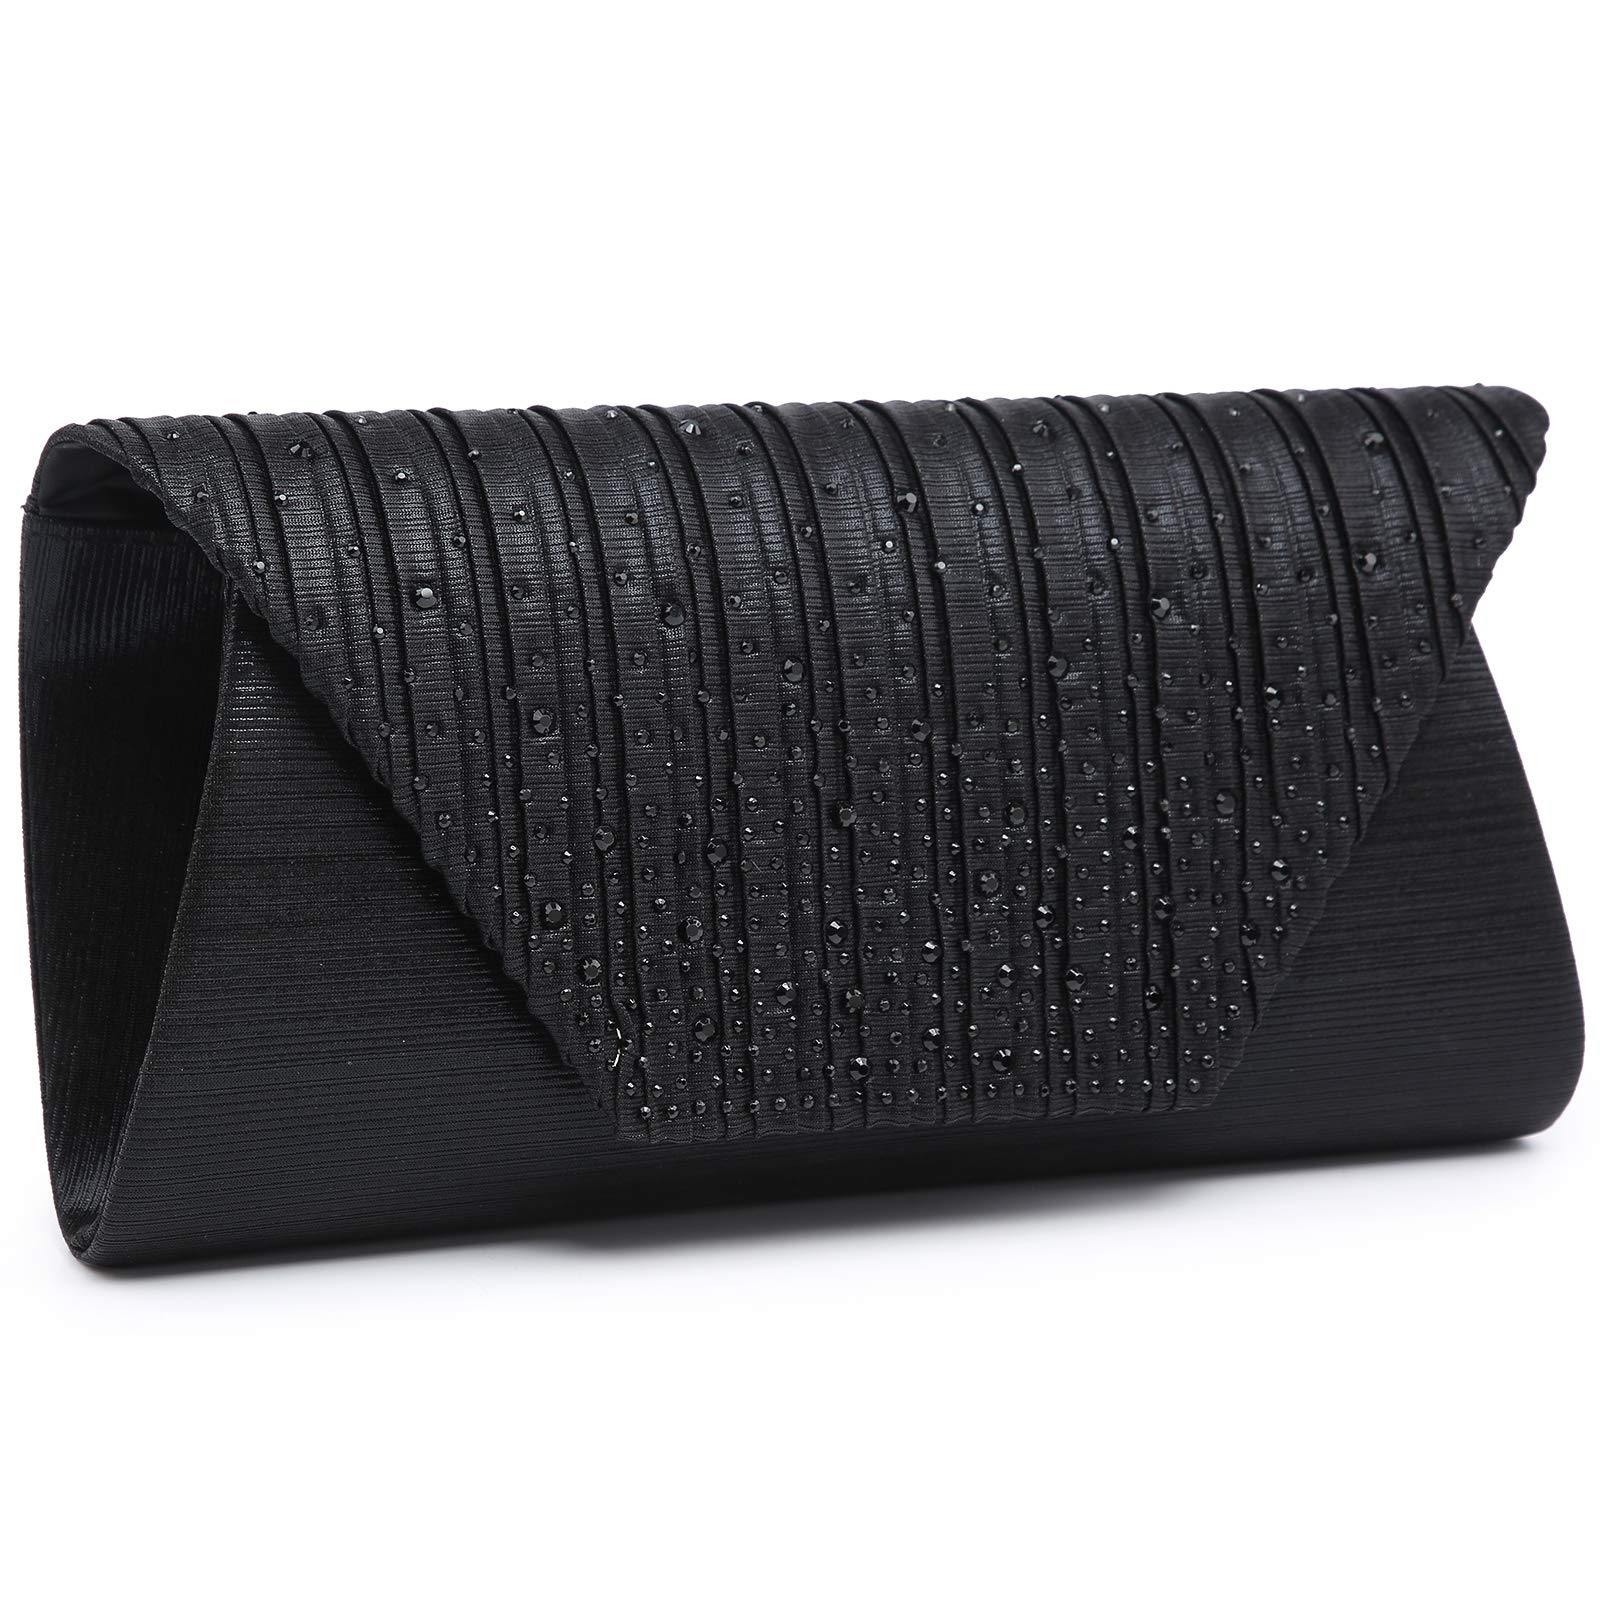  GripIt Envelope Prom Evening Bags And Clutches for Women  Rhinestone Designer Purse Ladies Bling Handbags Wedding Night Small Clutch  Shoulder Bag,Black : Clothing, Shoes & Jewelry